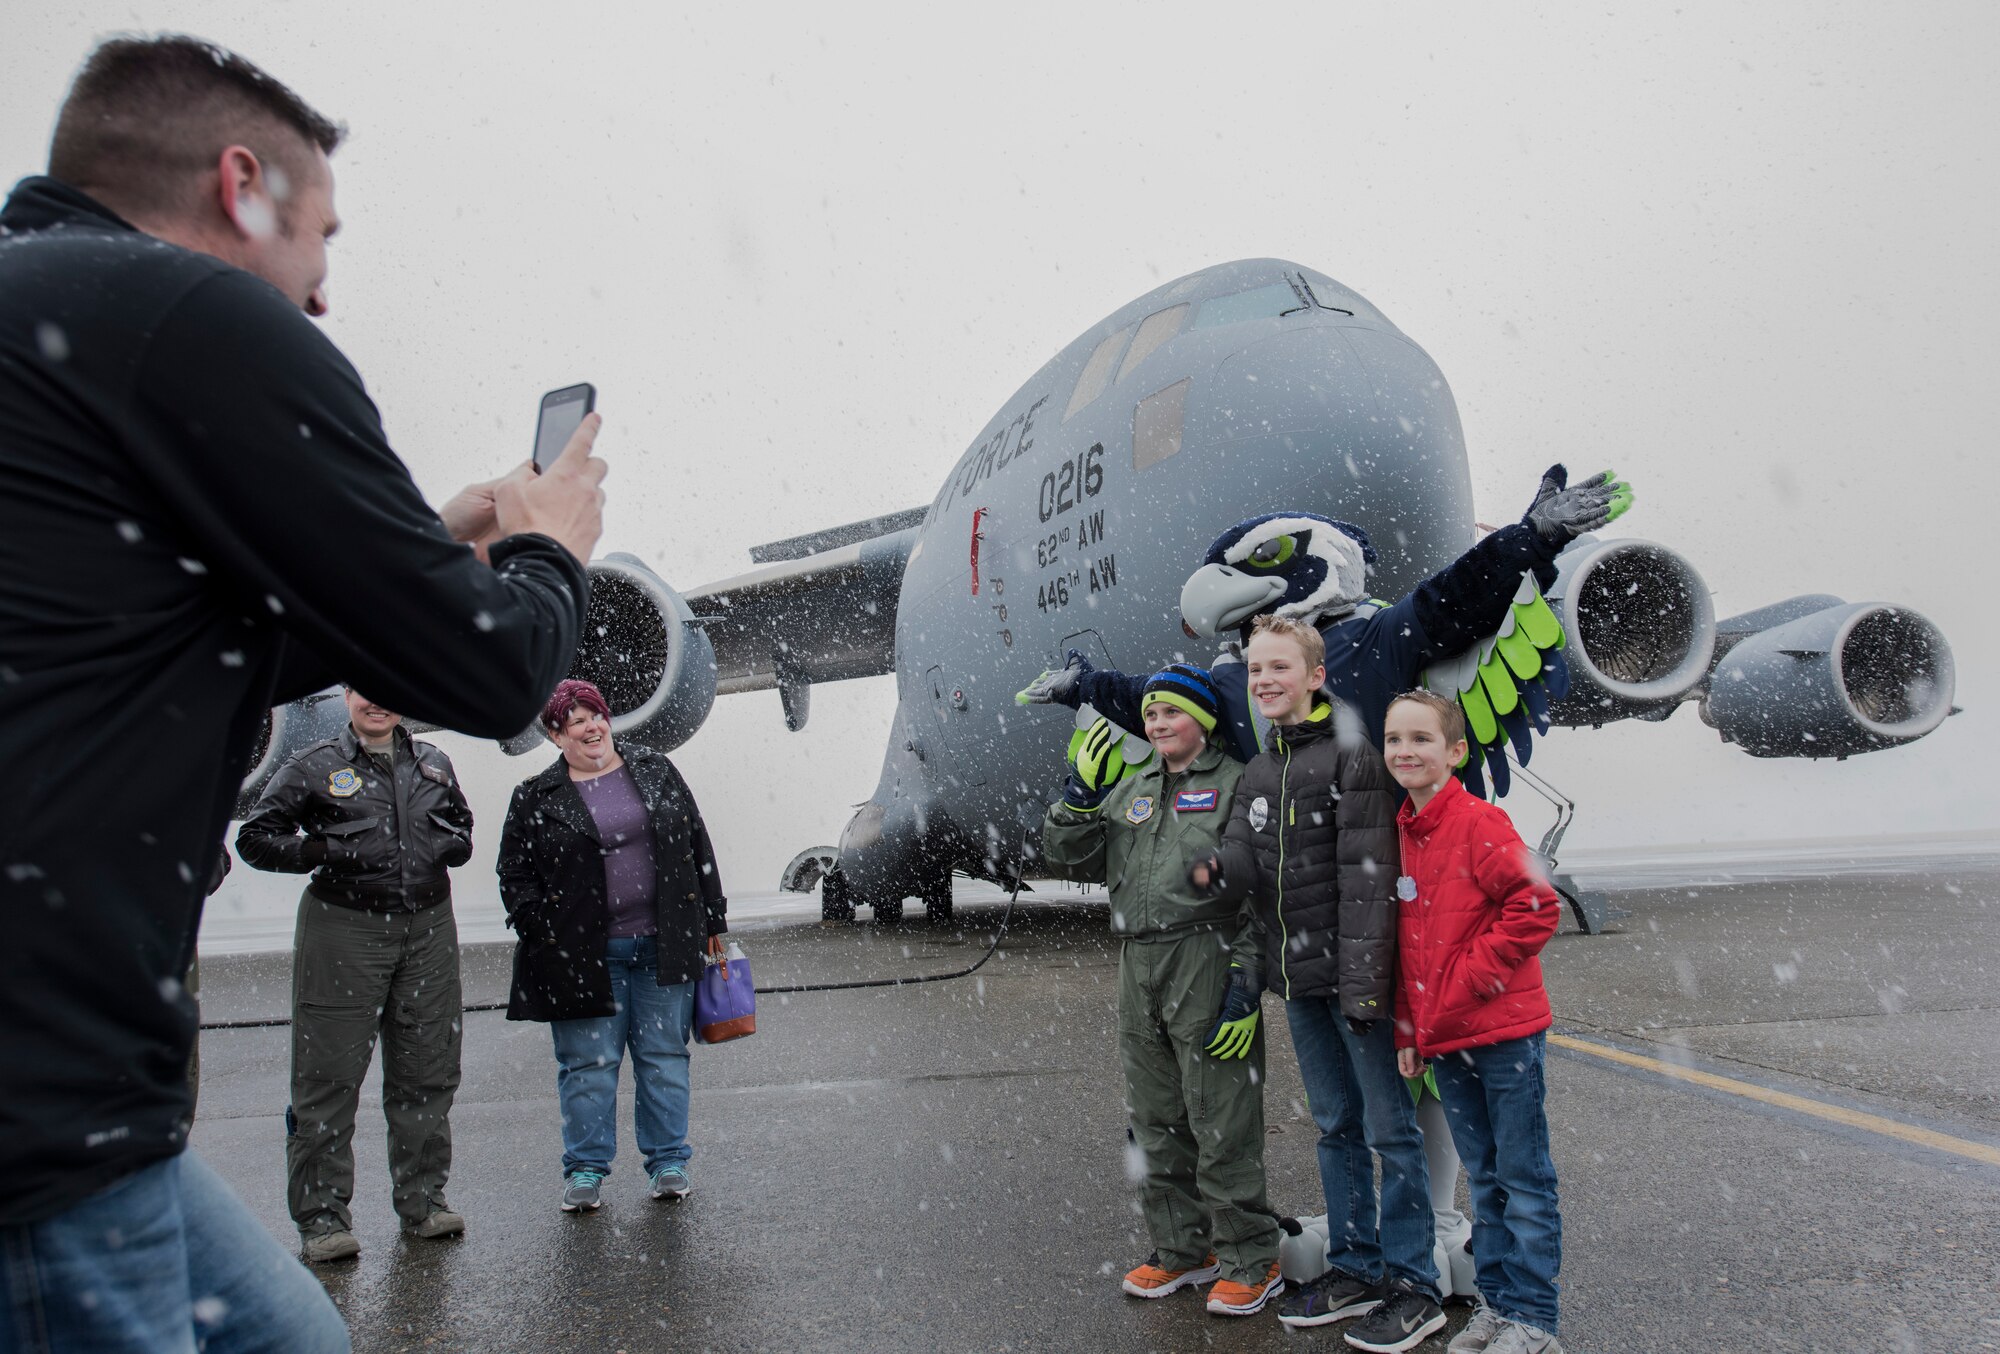 McKay Neel (third from left), McChord’s newest Pilot for a Day participant, and two friends take a photo with Blitz, Seattle Seahawks mascot, during a tour of McChord Field at Joint Base Lewis-McChord, Wash., Feb. 20, 2018. McKay was joined on his tour by his parents, two friends, their dad and 4th Airlift Squadron personnel.